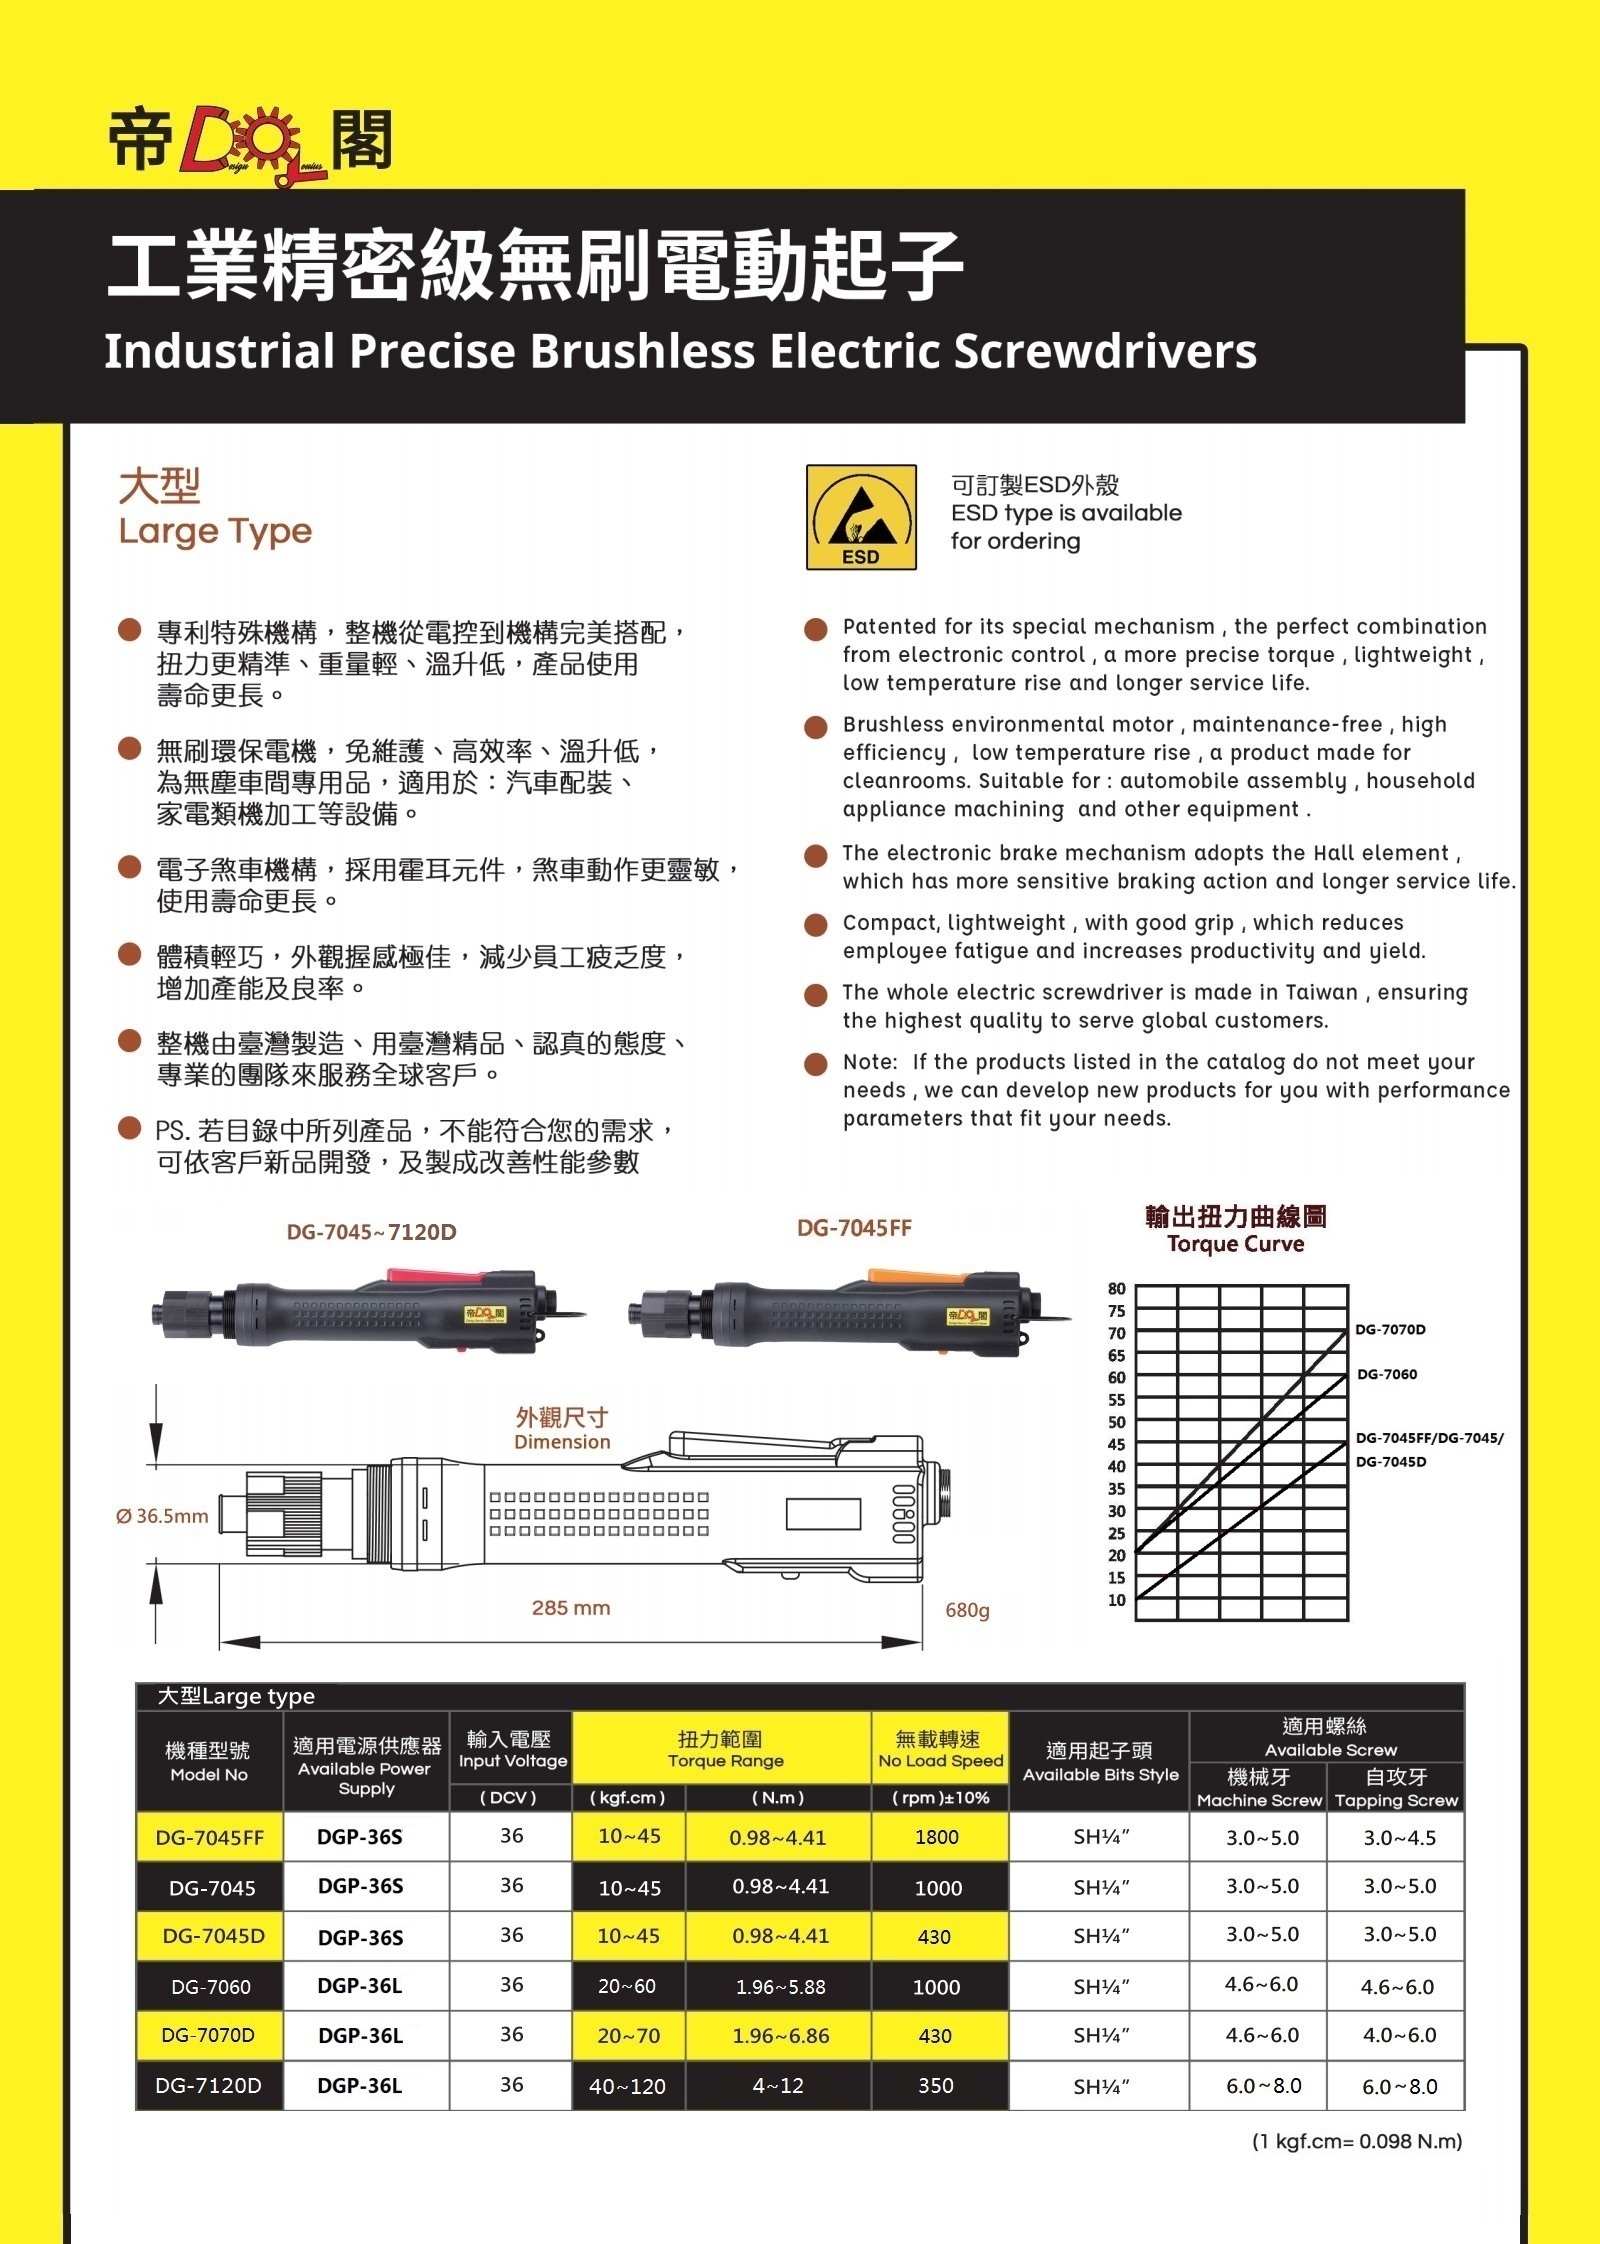 Industrial Precise Brushless Electric Screwdrivers